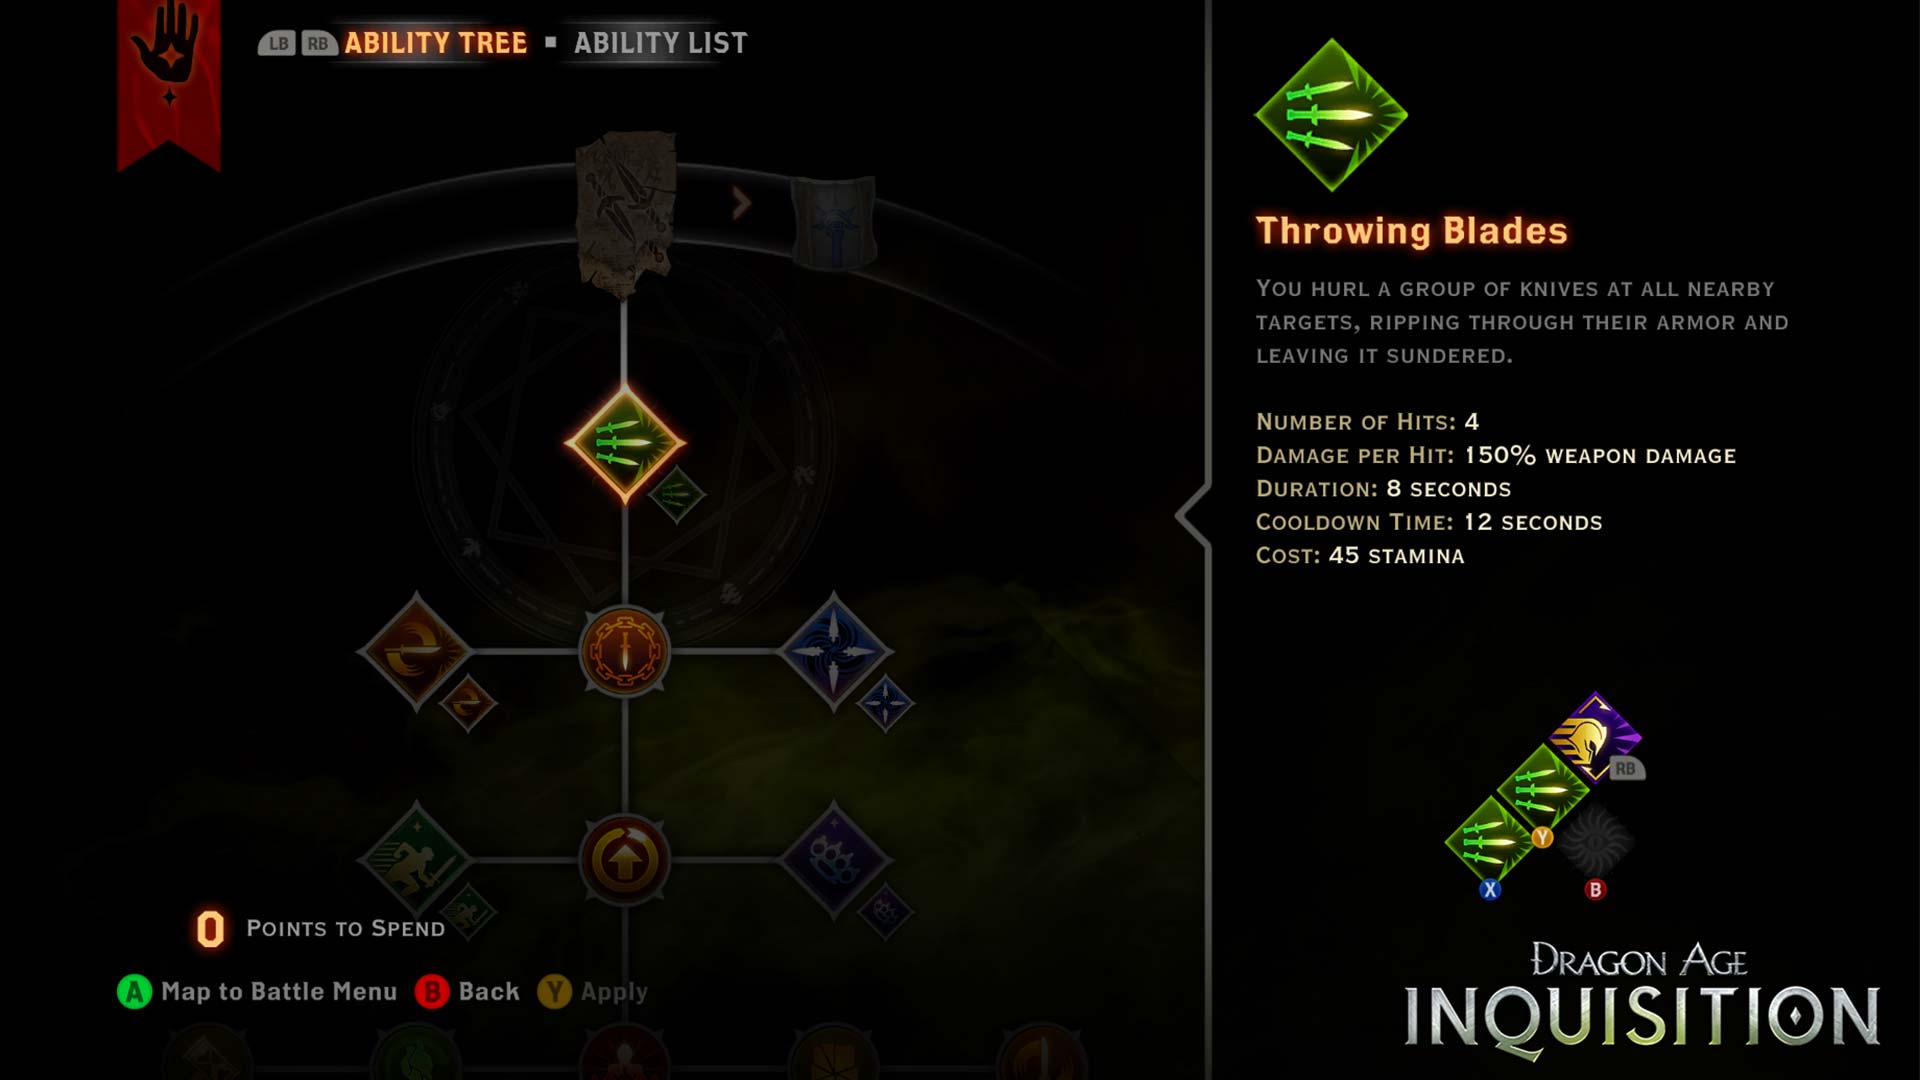 dragon age inquisition patch notes pc